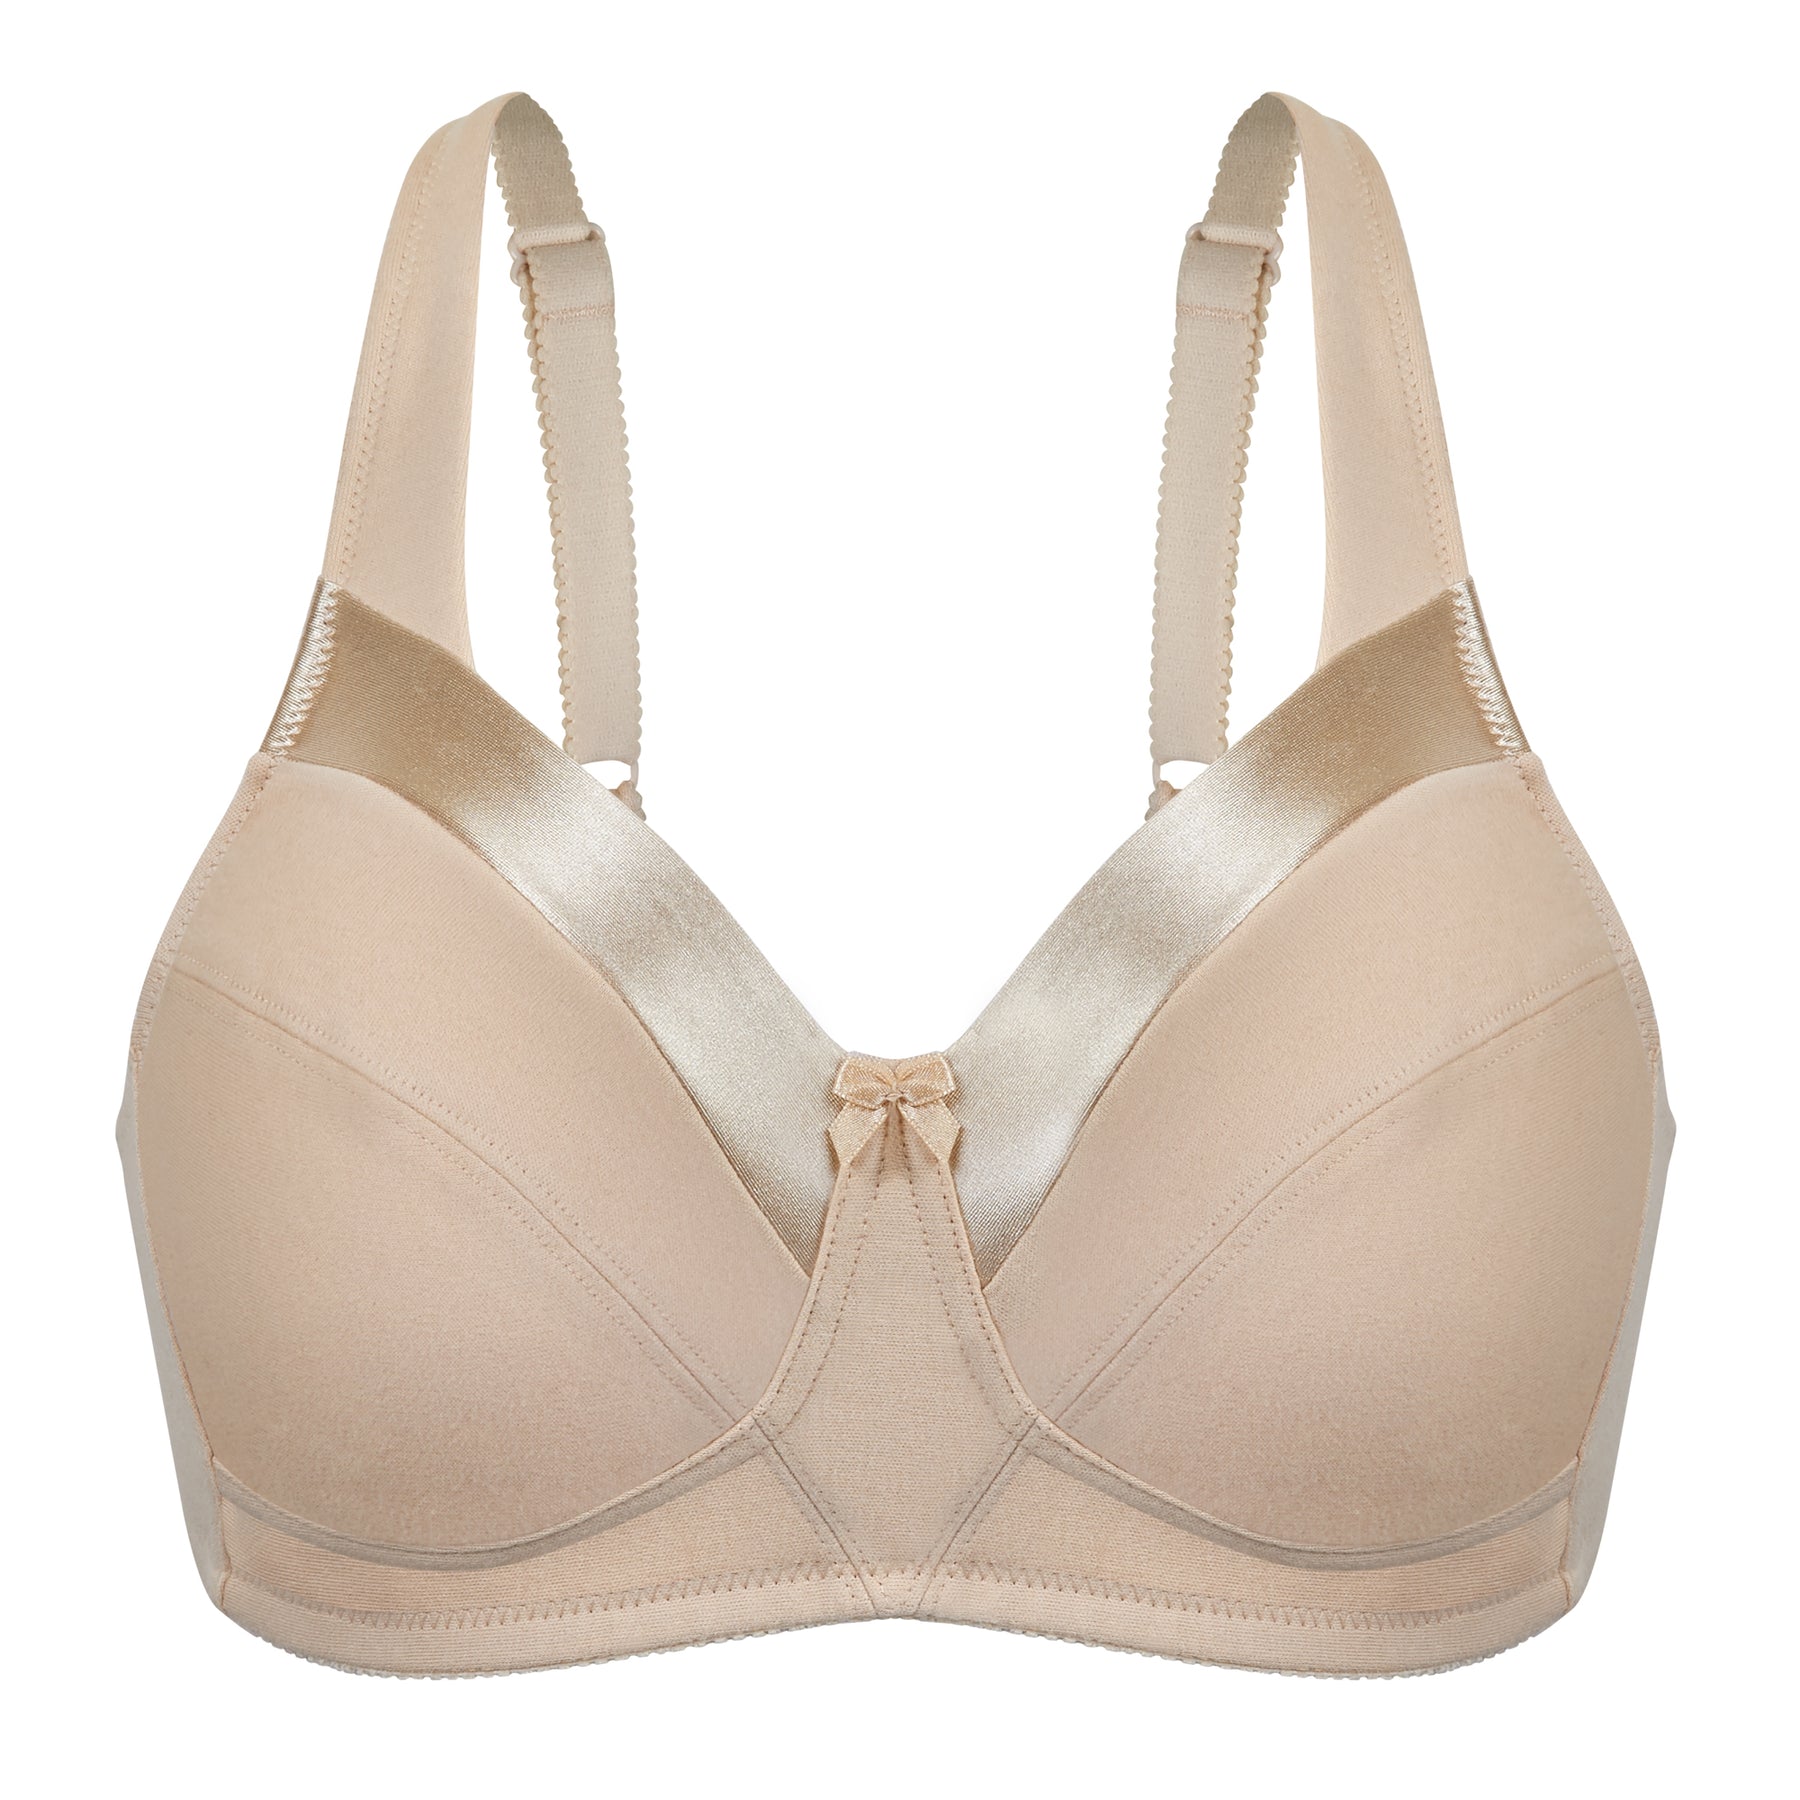 Satin Trim Wireless Cotton Bra with Unlined Cups